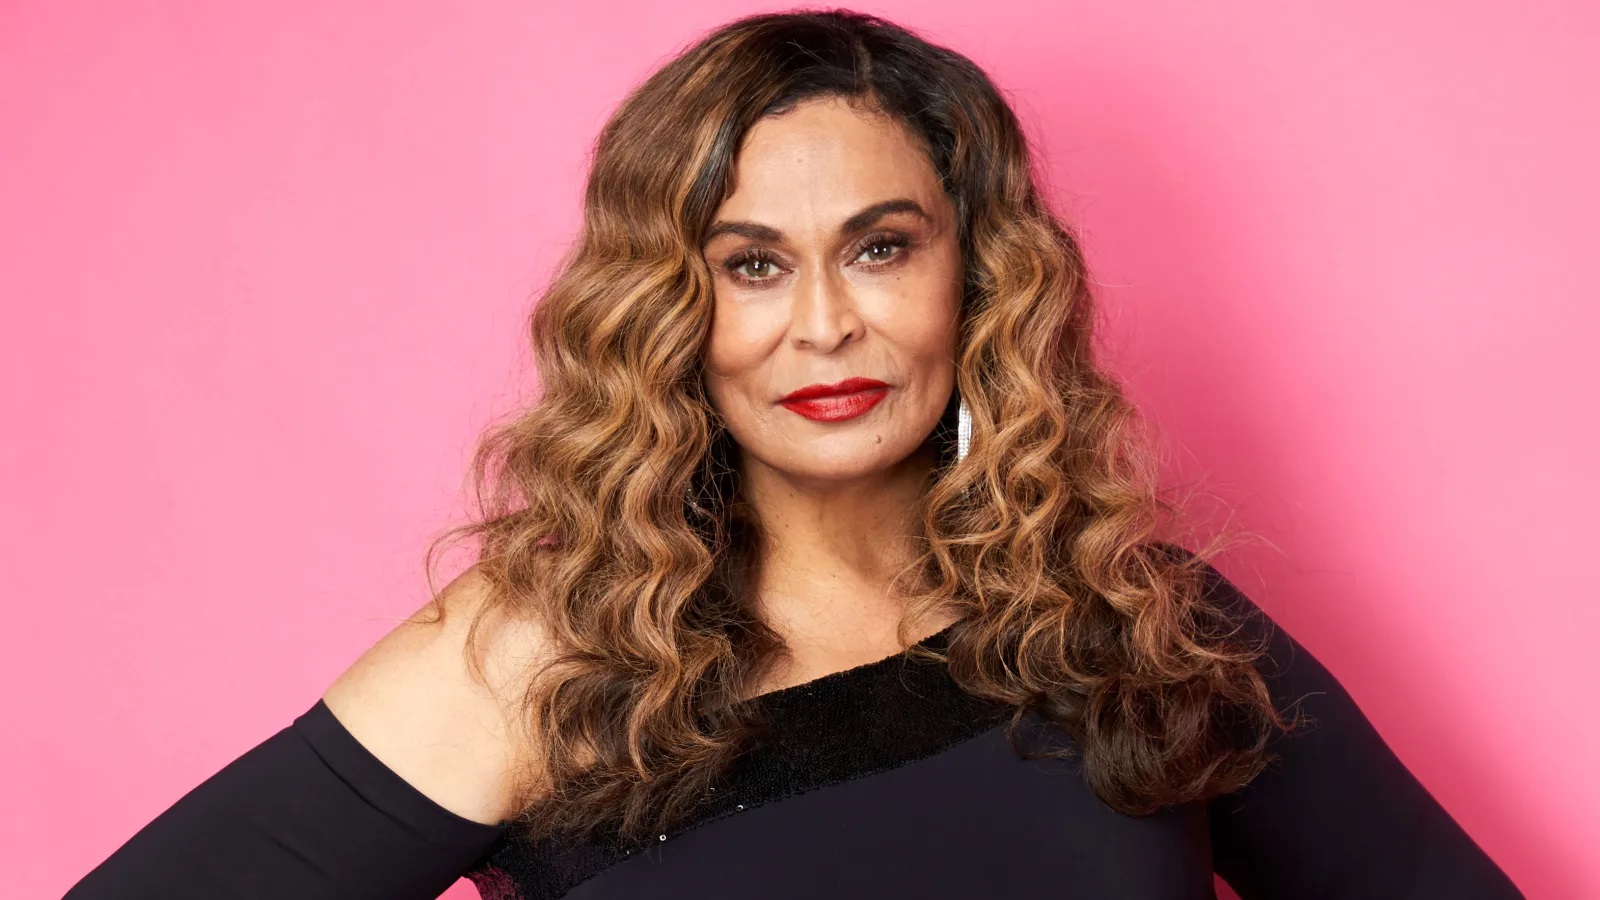 tina-knowles-clears-the-air-over-liked-critical-janet-jackson-post